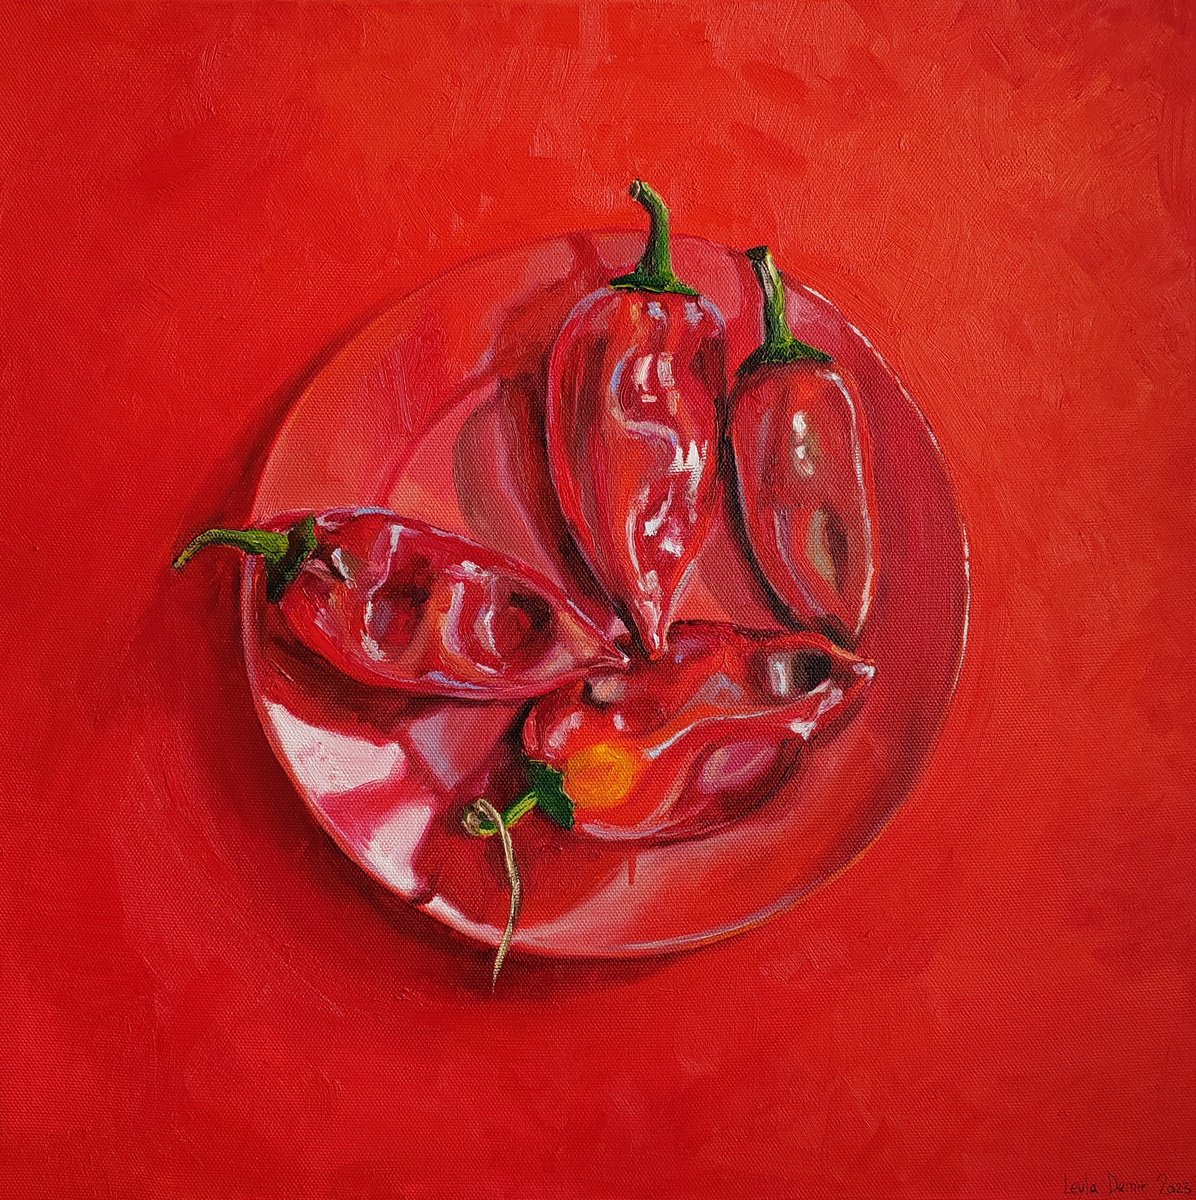 Fiery Red Still Life with Paprika on a Plate by Leyla Demir